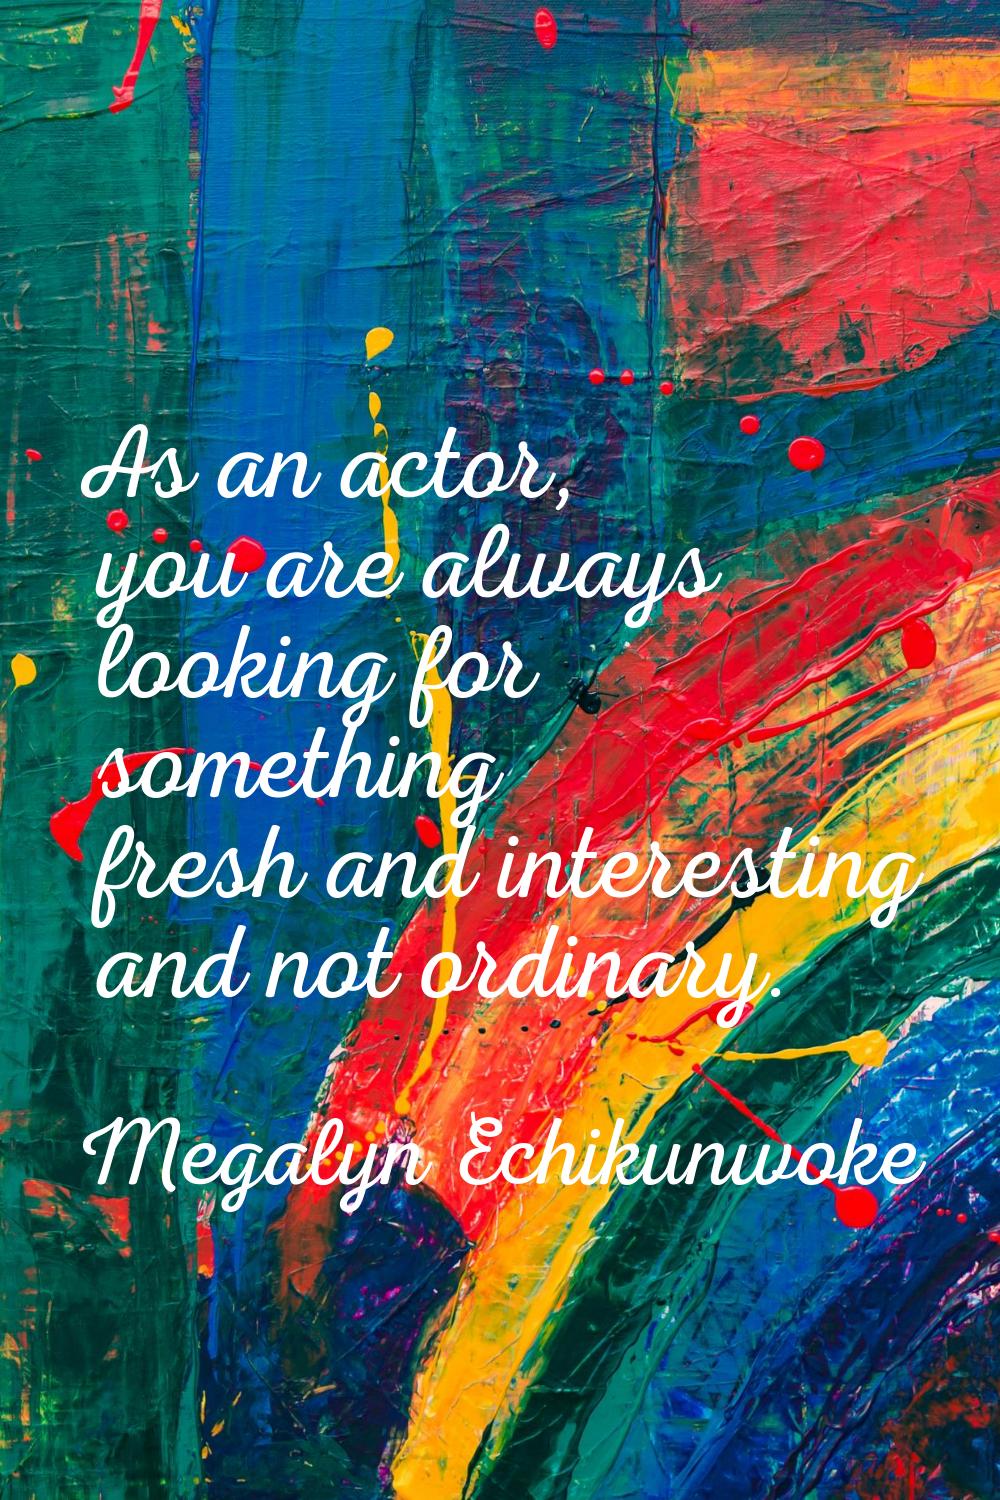 As an actor, you are always looking for something fresh and interesting and not ordinary.